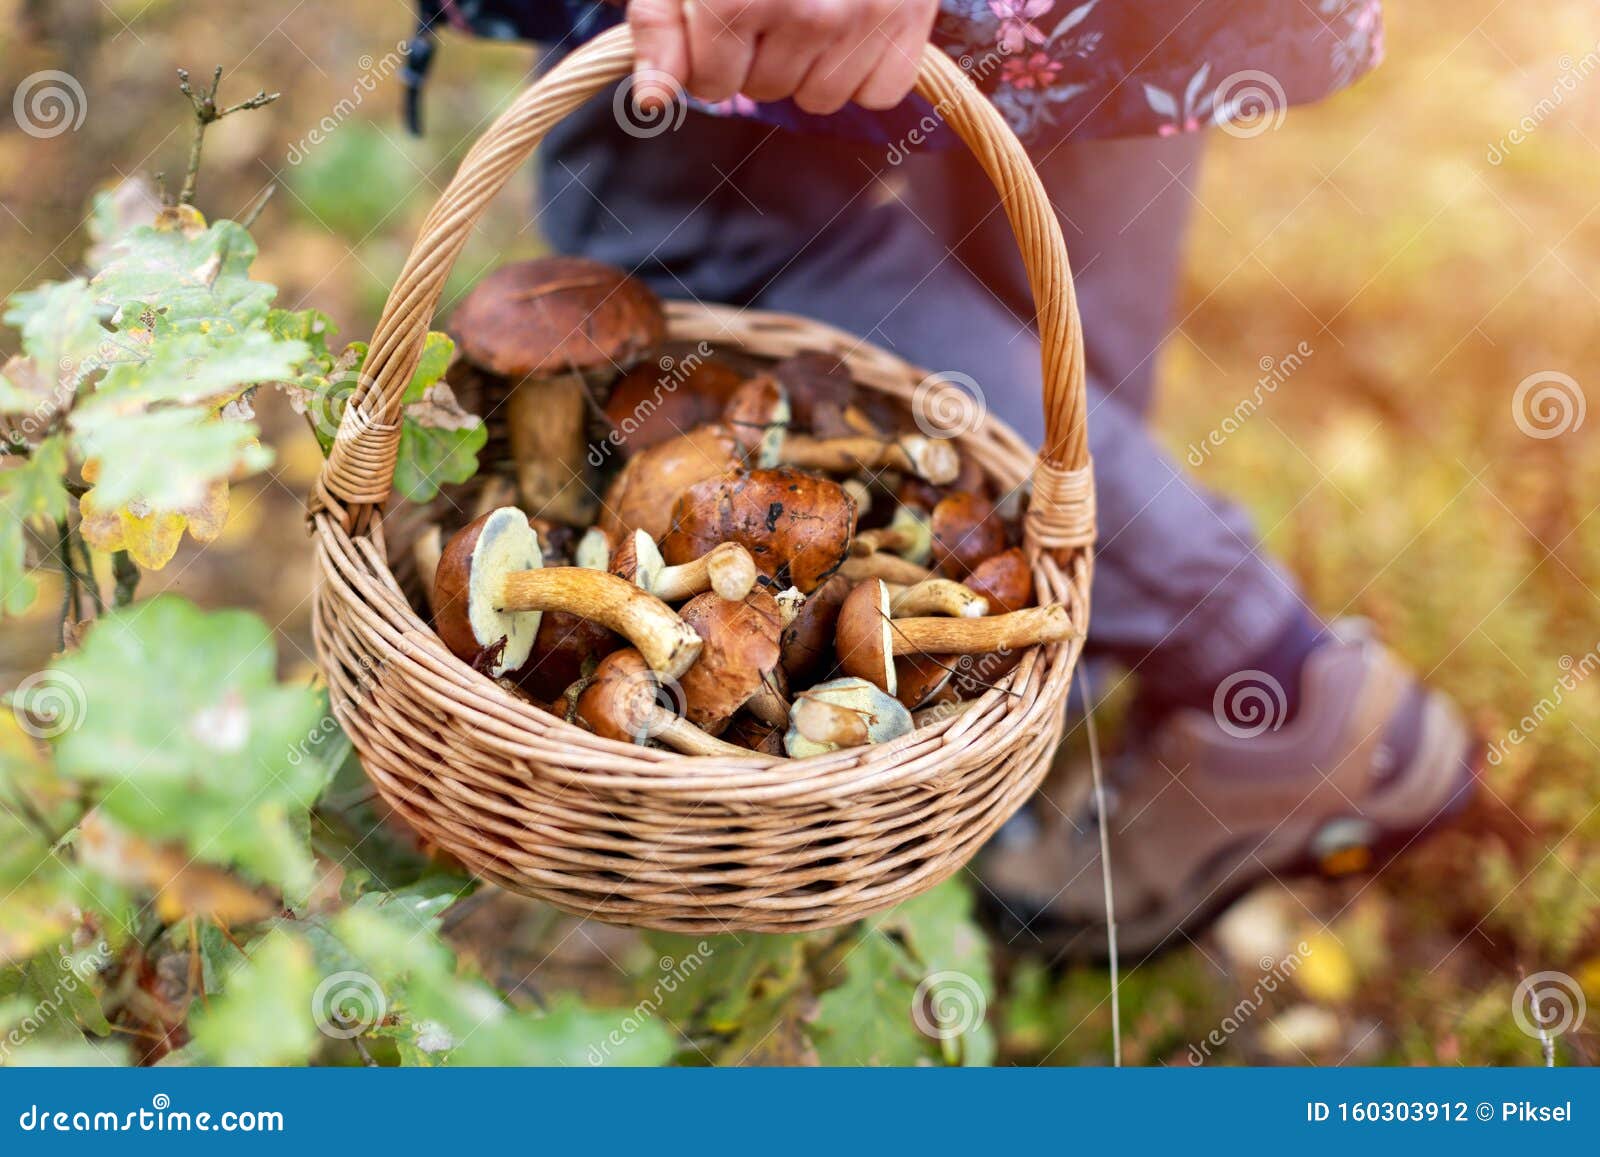 picking mushrooms in the woods